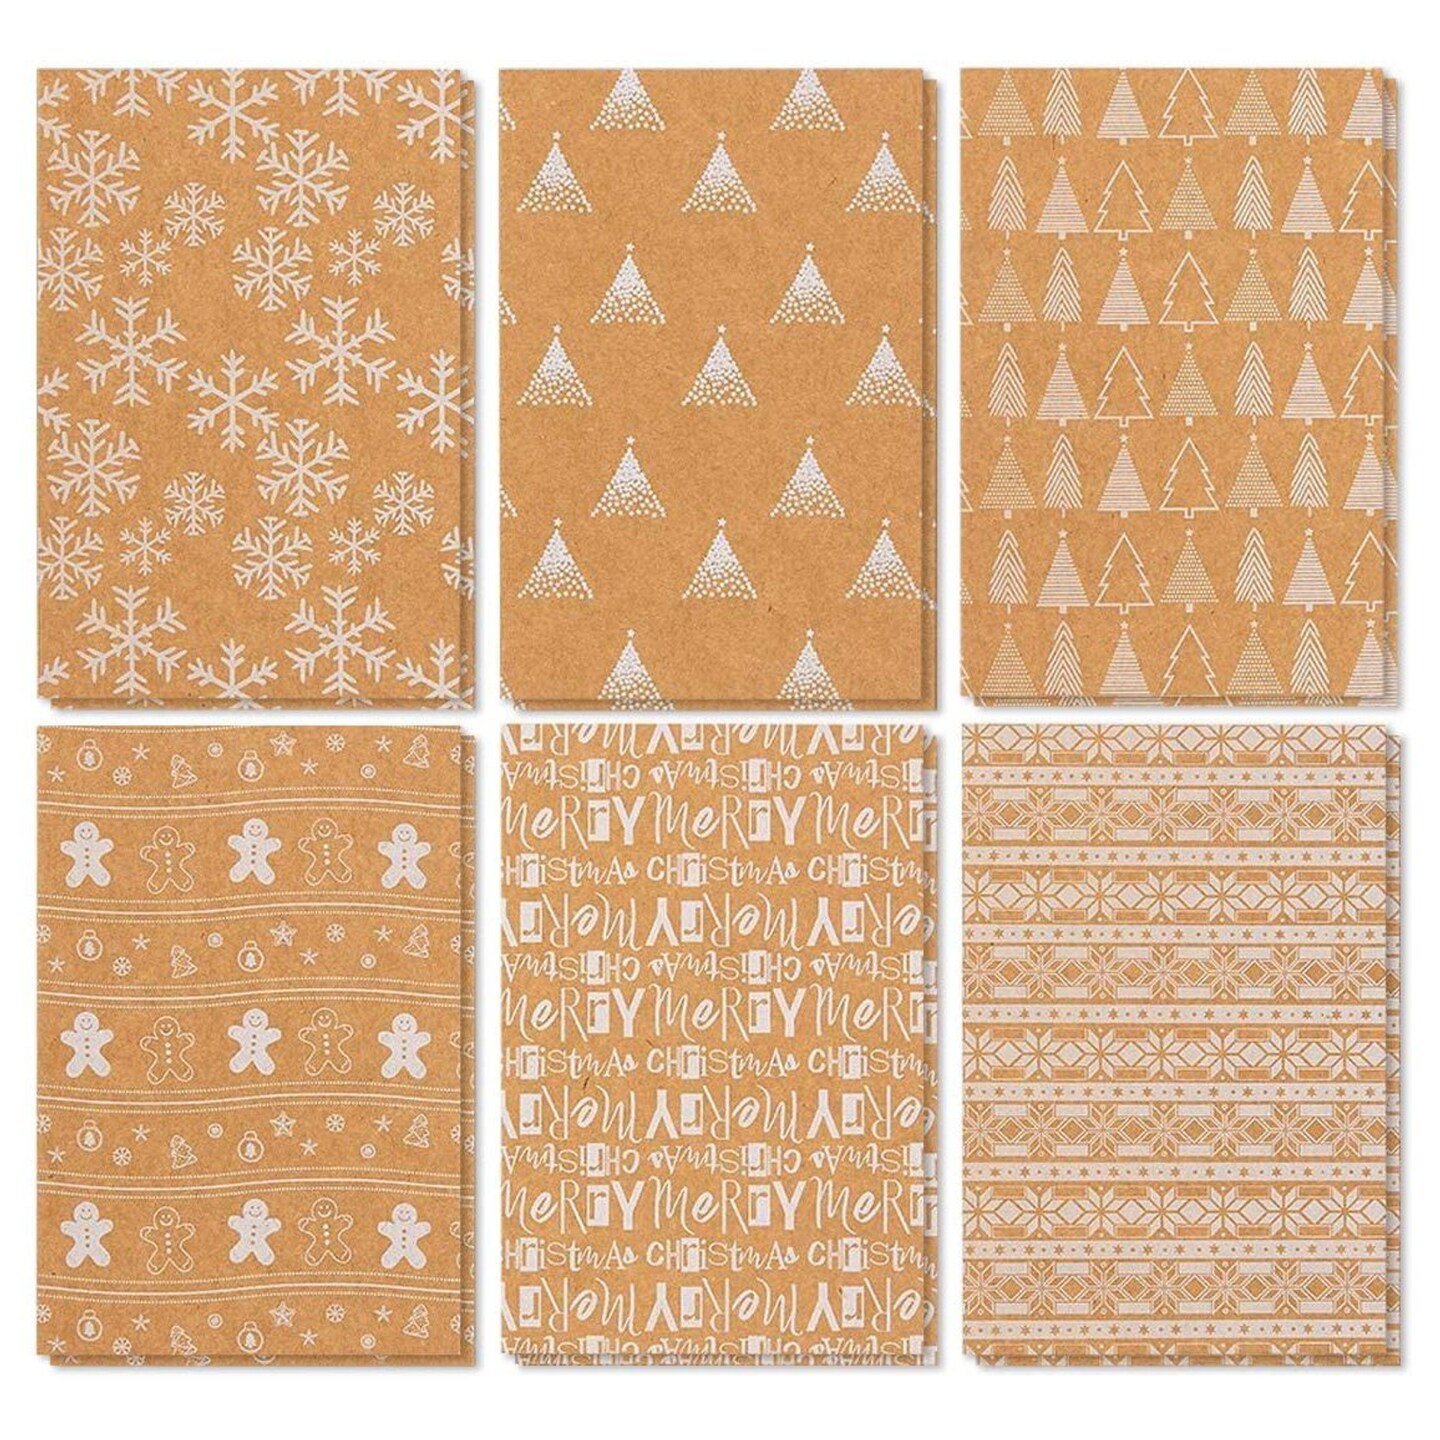 36 Pack Kraft Christmas Greeting Cards with Envelopes Bulk Box Set, 6 Winter Holiday Designs (4x6 In)